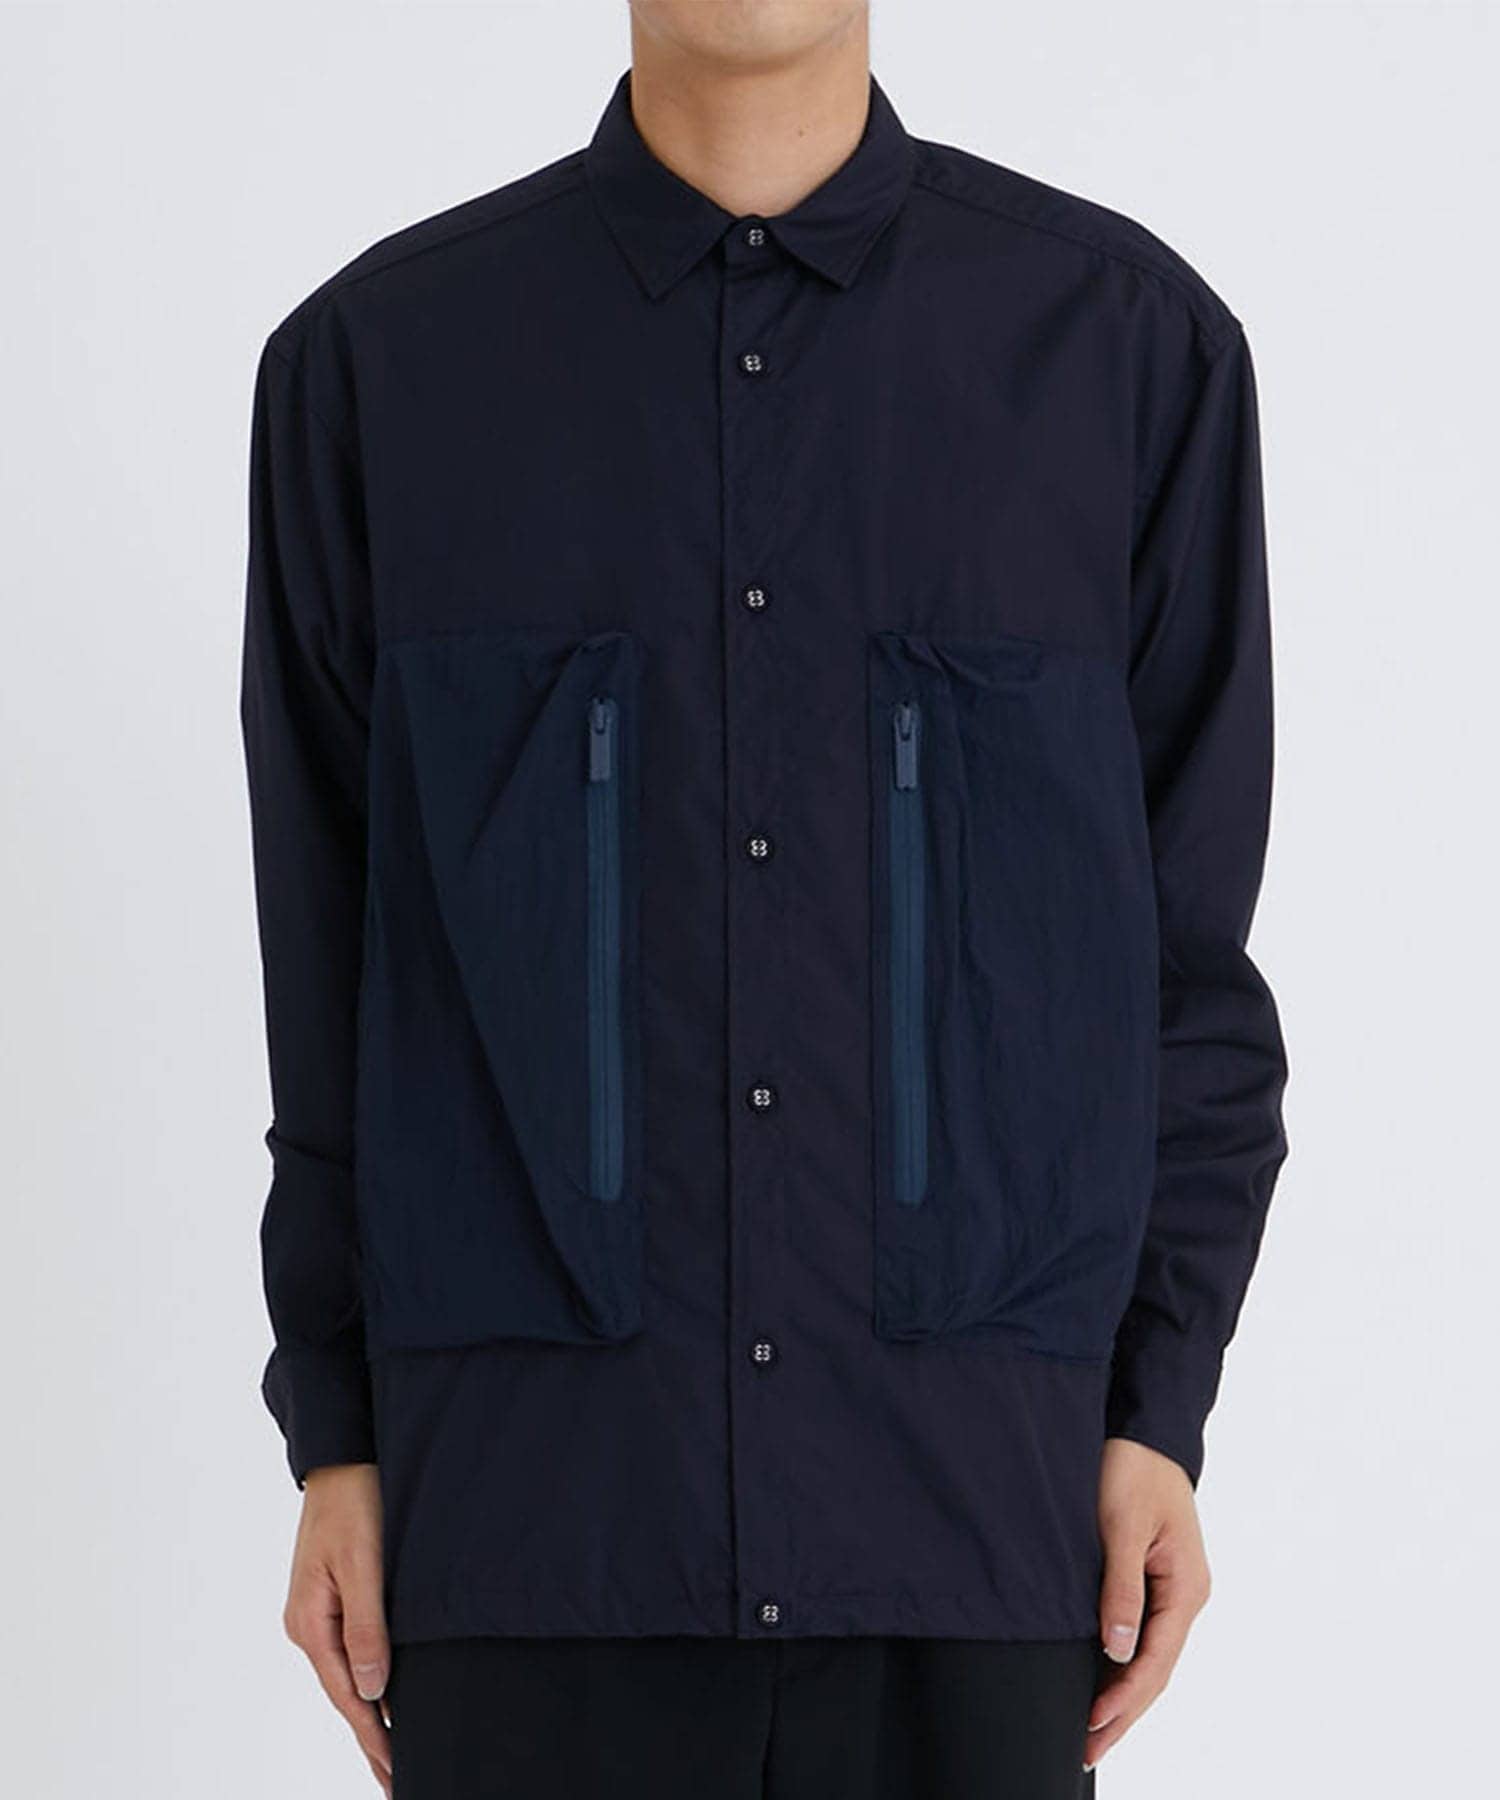 SHIRT WITH LARGE POCKETS White Mountaineering